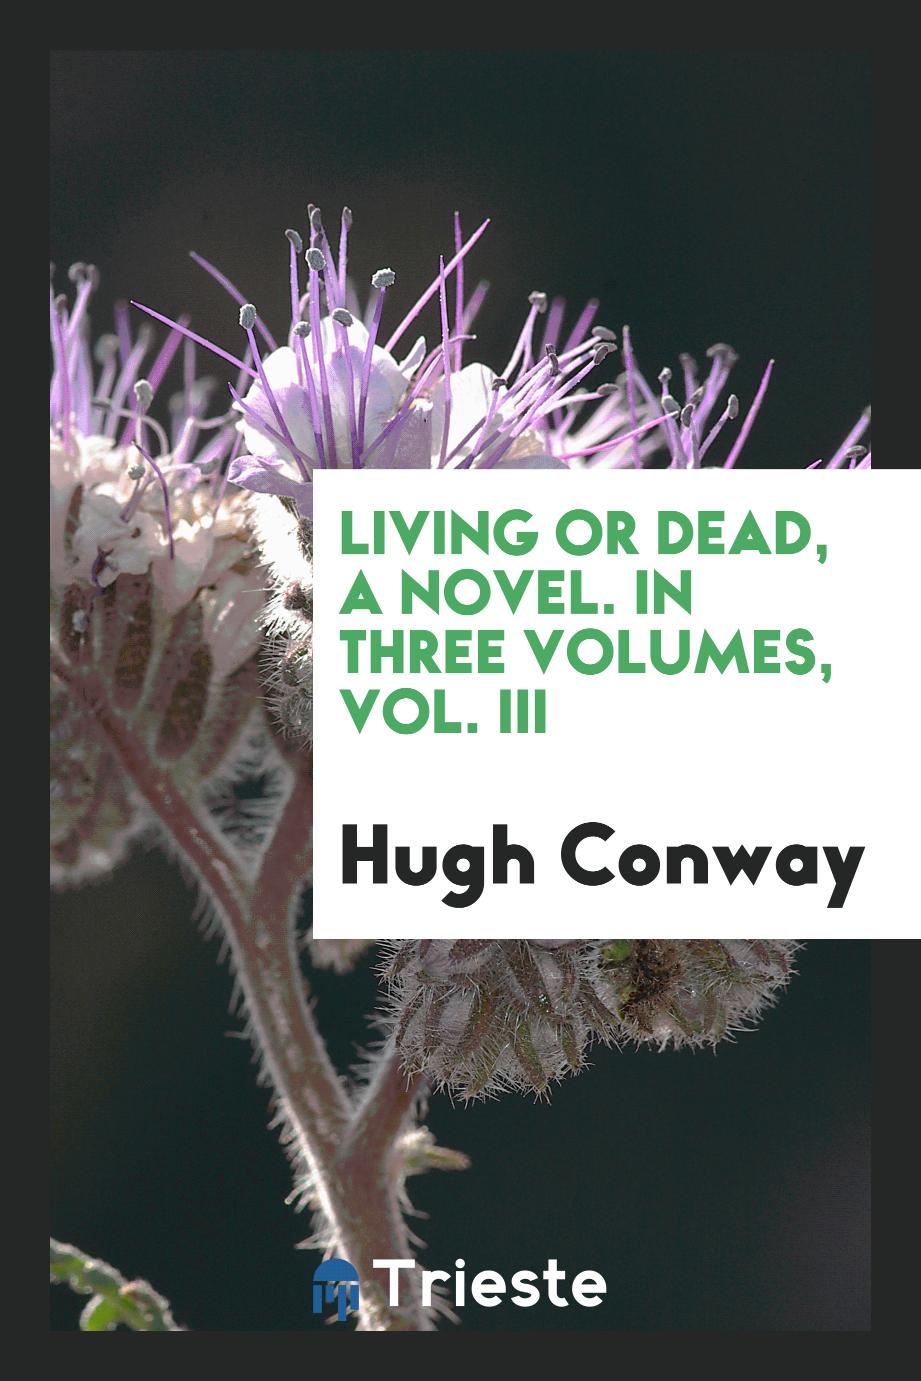 Living or dead, a novel. In three volumes, Vol. III